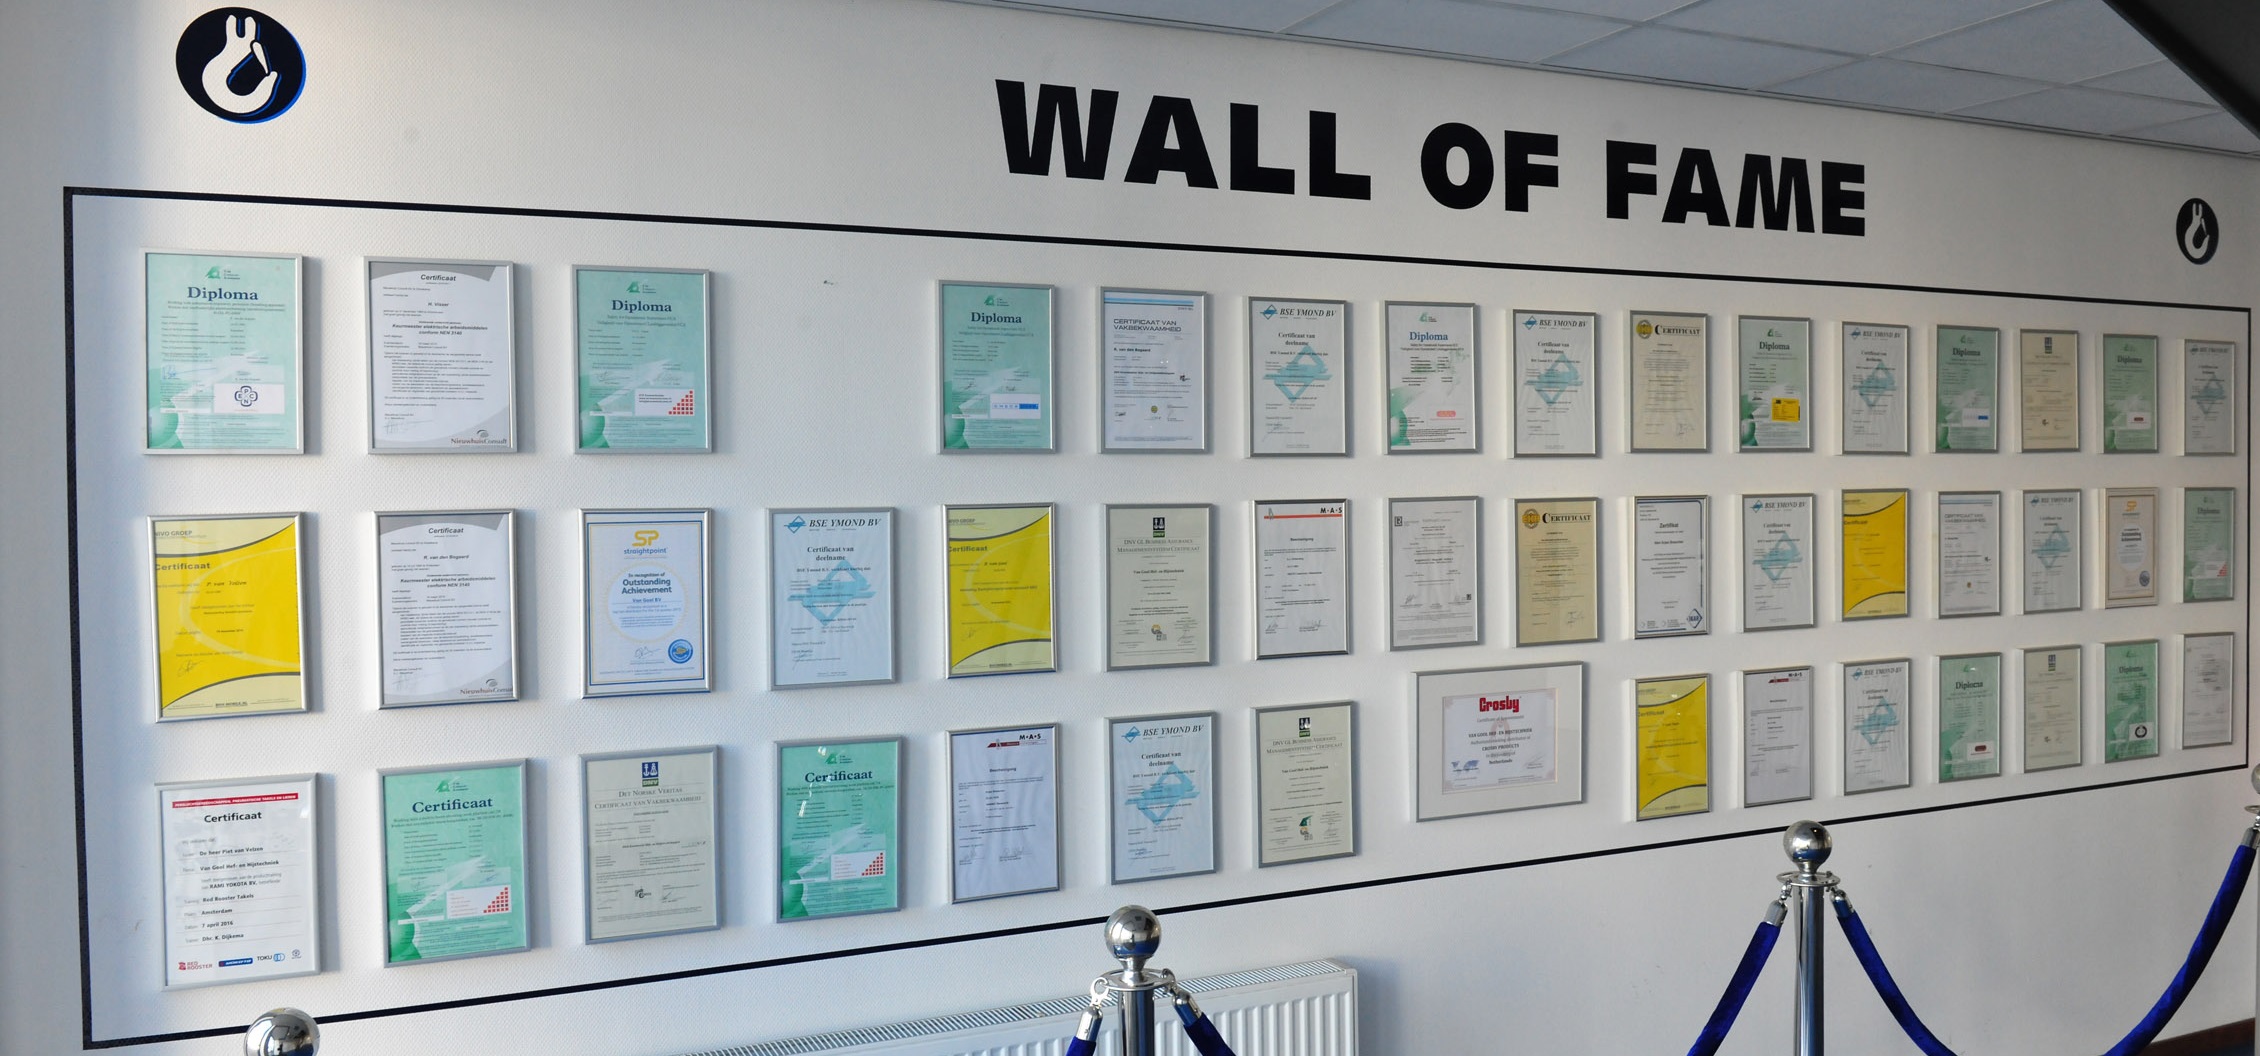 Wall of fame